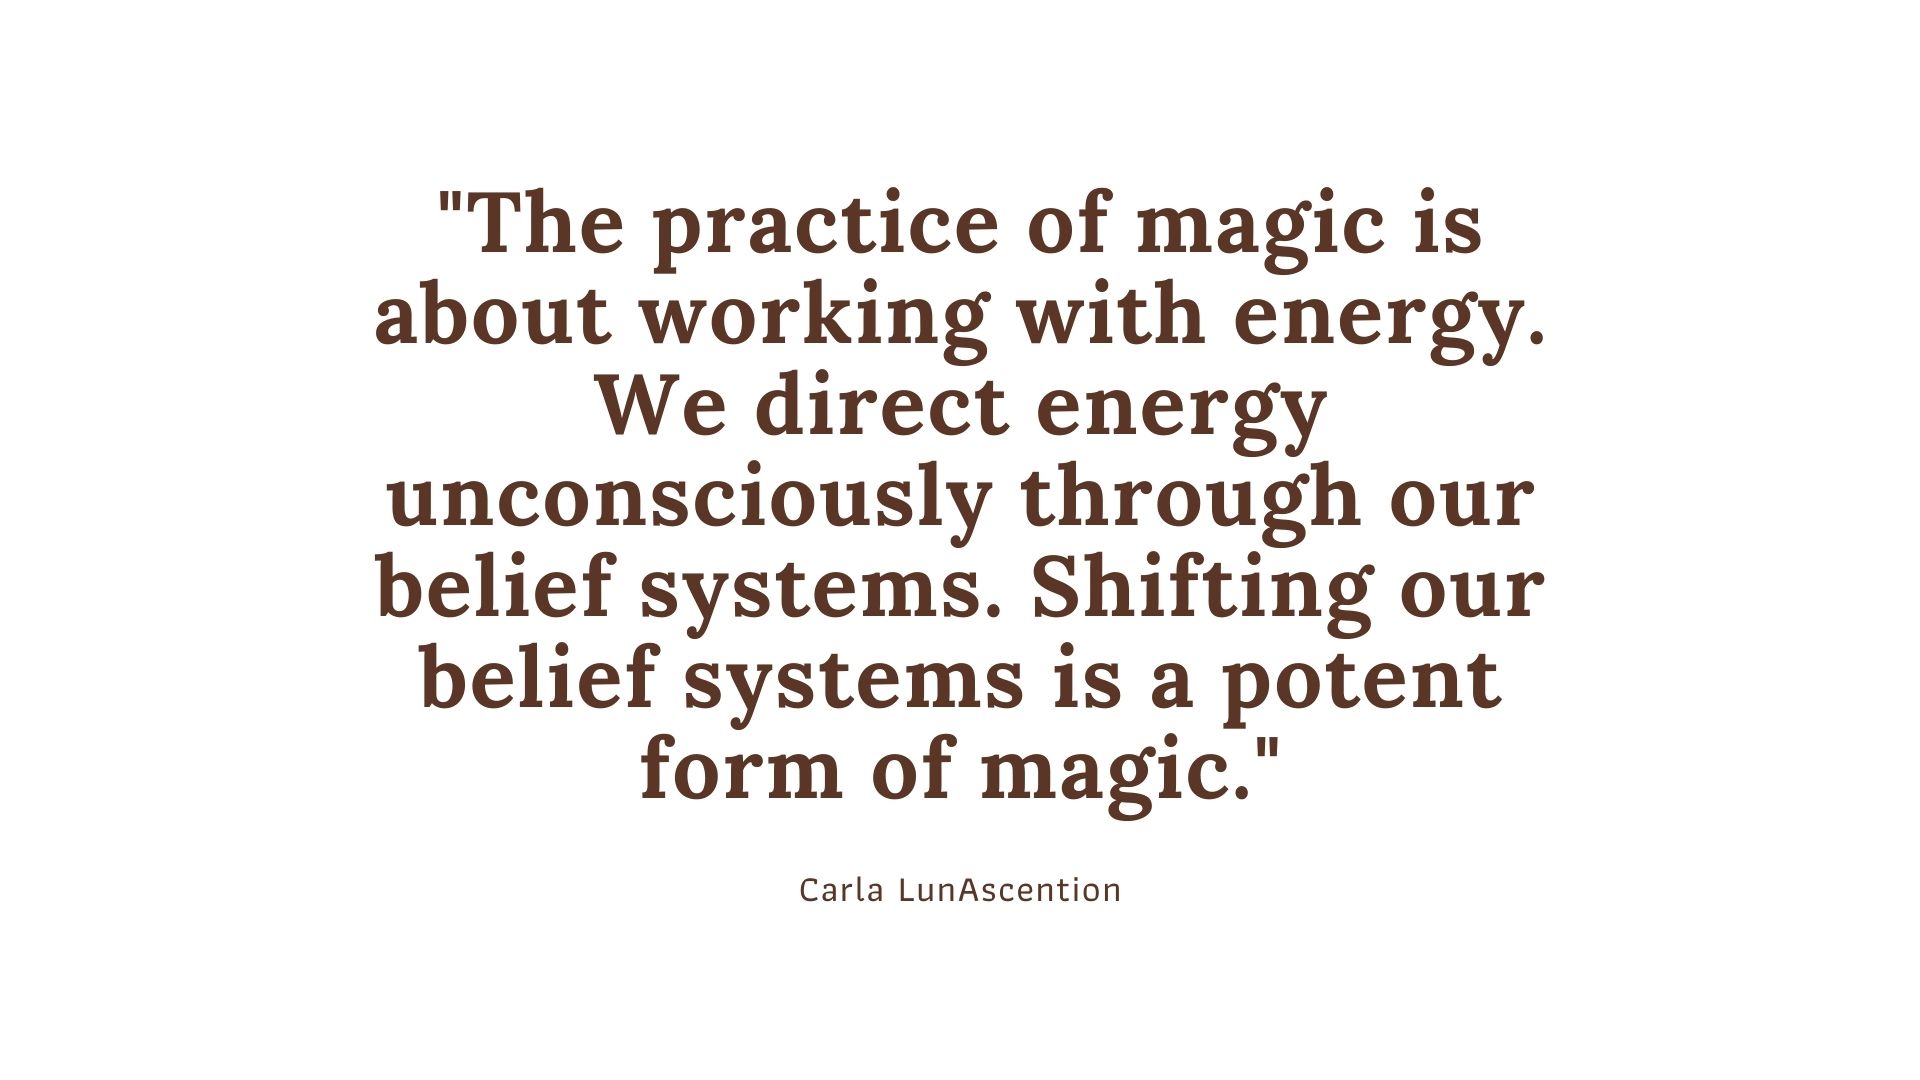 "The practice of magic is about working with energy. We direct energy unconsciously through our belief systems. Shifting our belief systems is a potent form of magic." Psychic Carla LunAscention